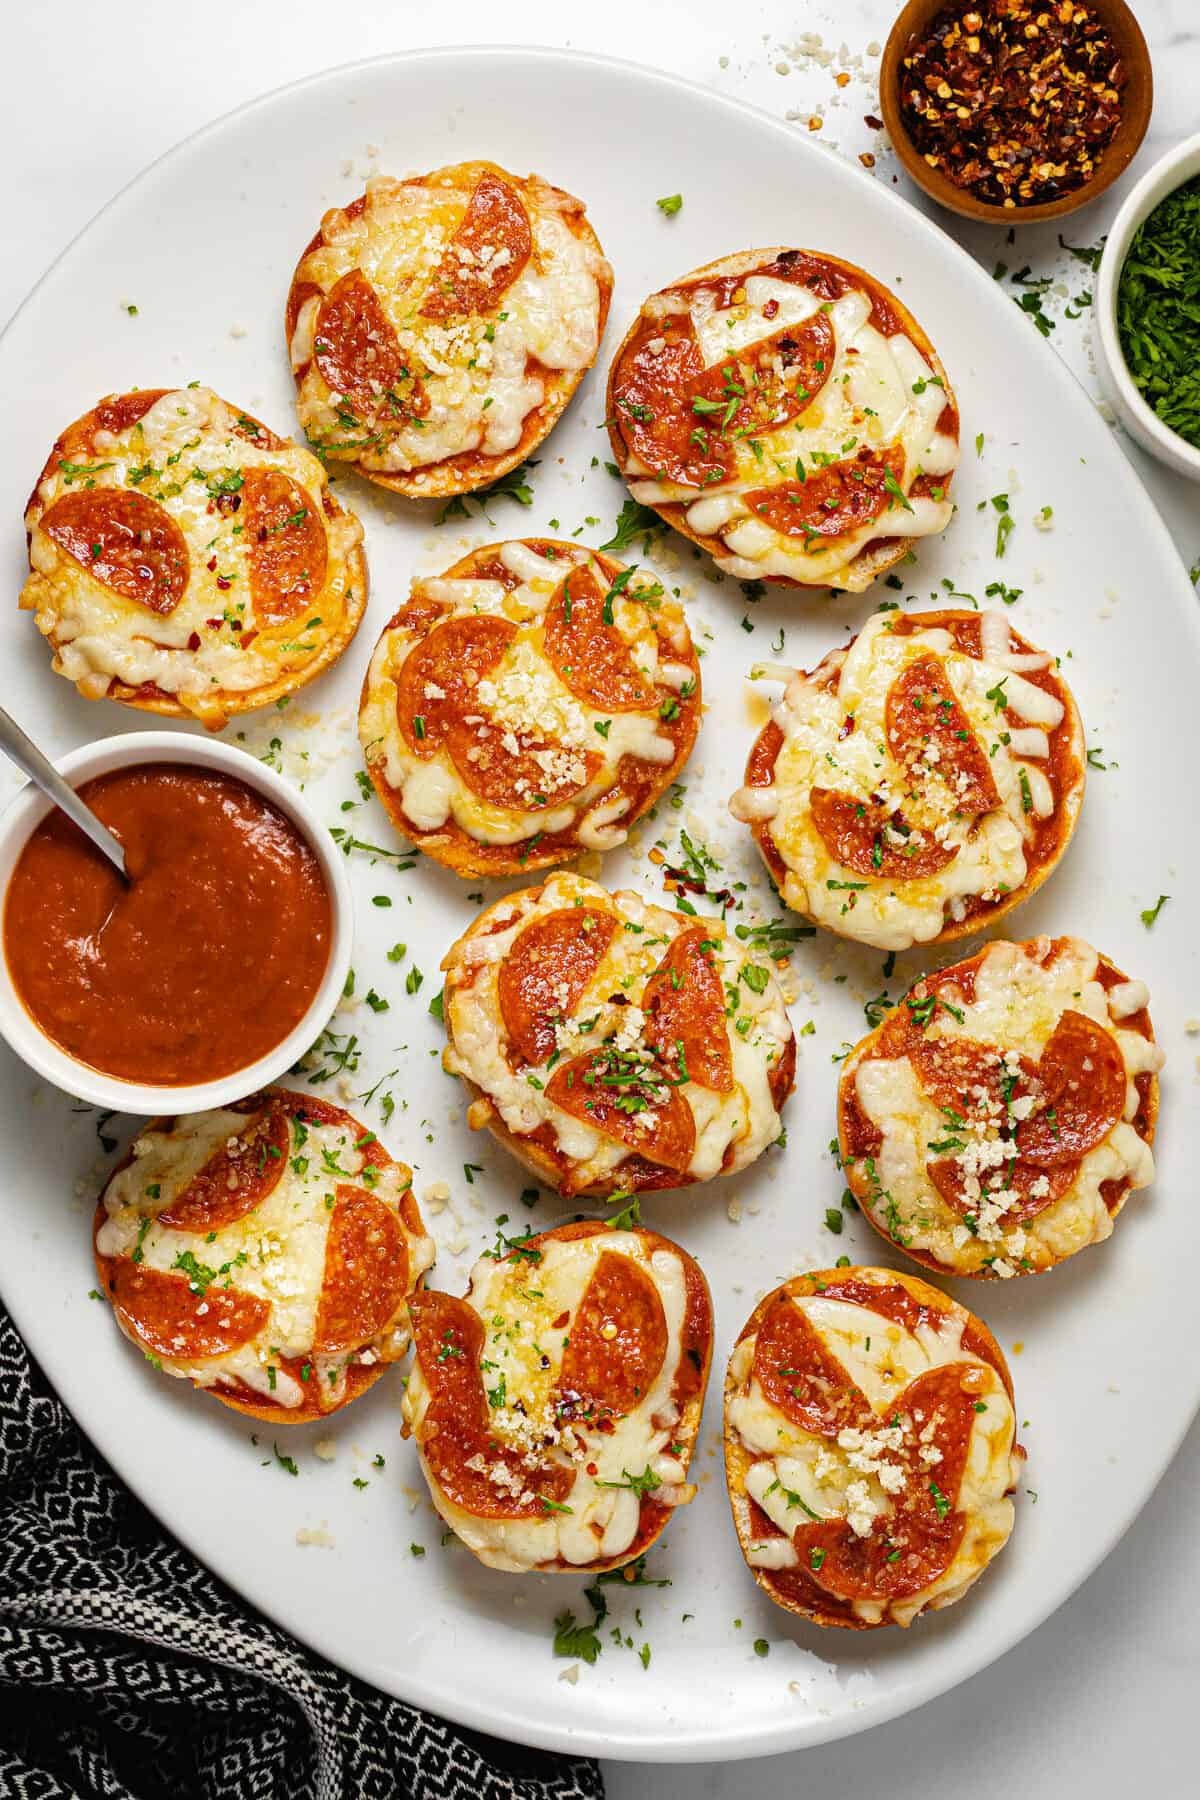 Large white platter filled with homemade pizza bagel bites garnished with parsley